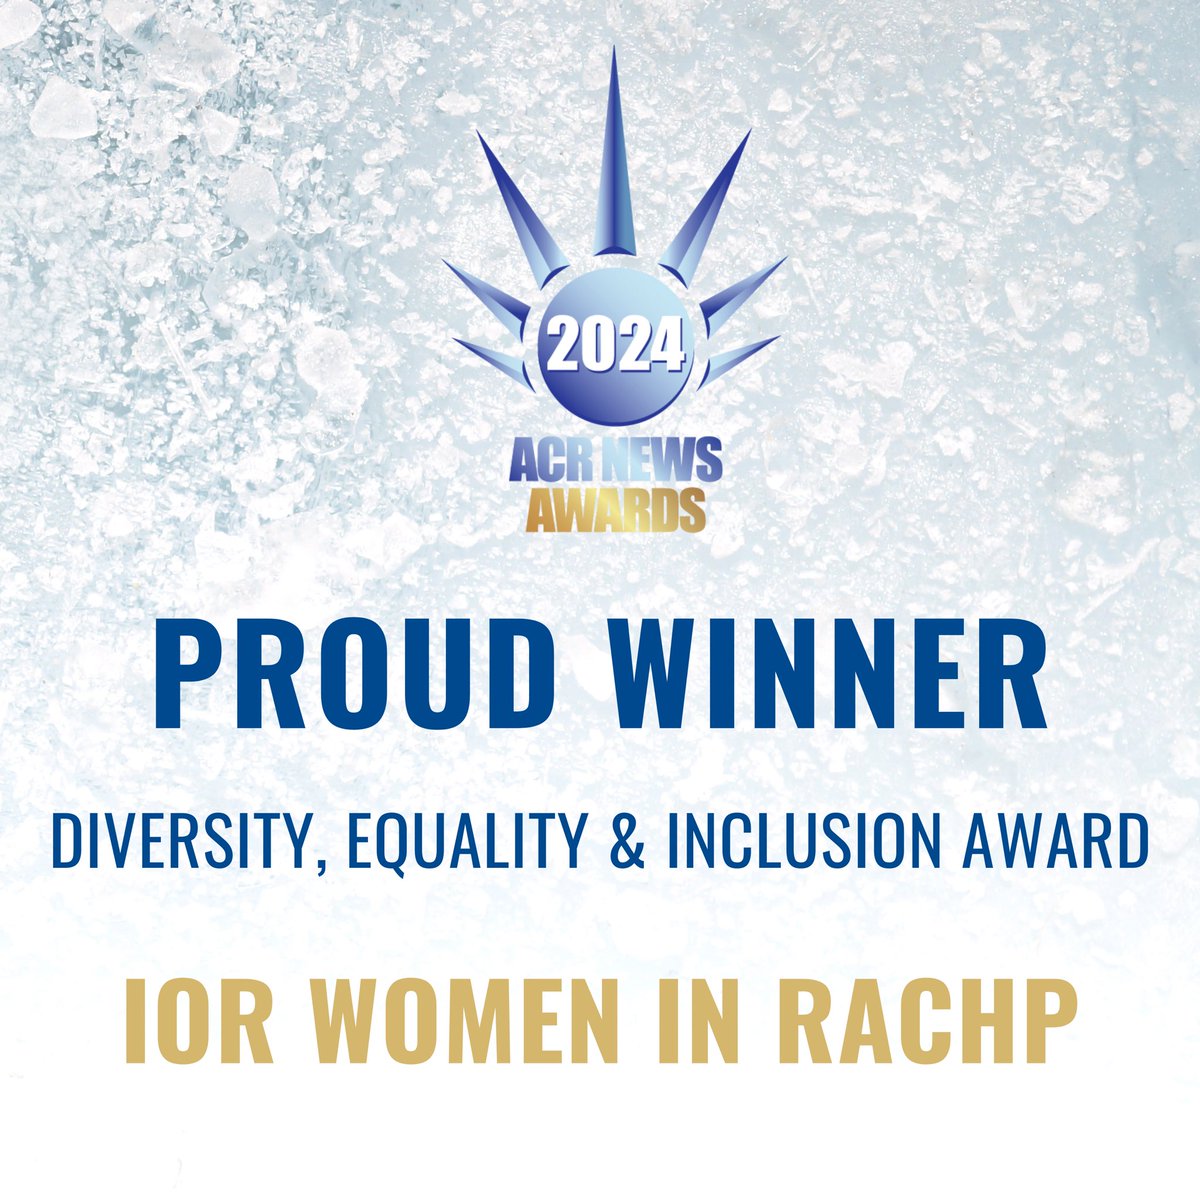 The Diversity, Equality and Inclusion Award has been awarded to the IOR Women in RACHP! Congratulations!